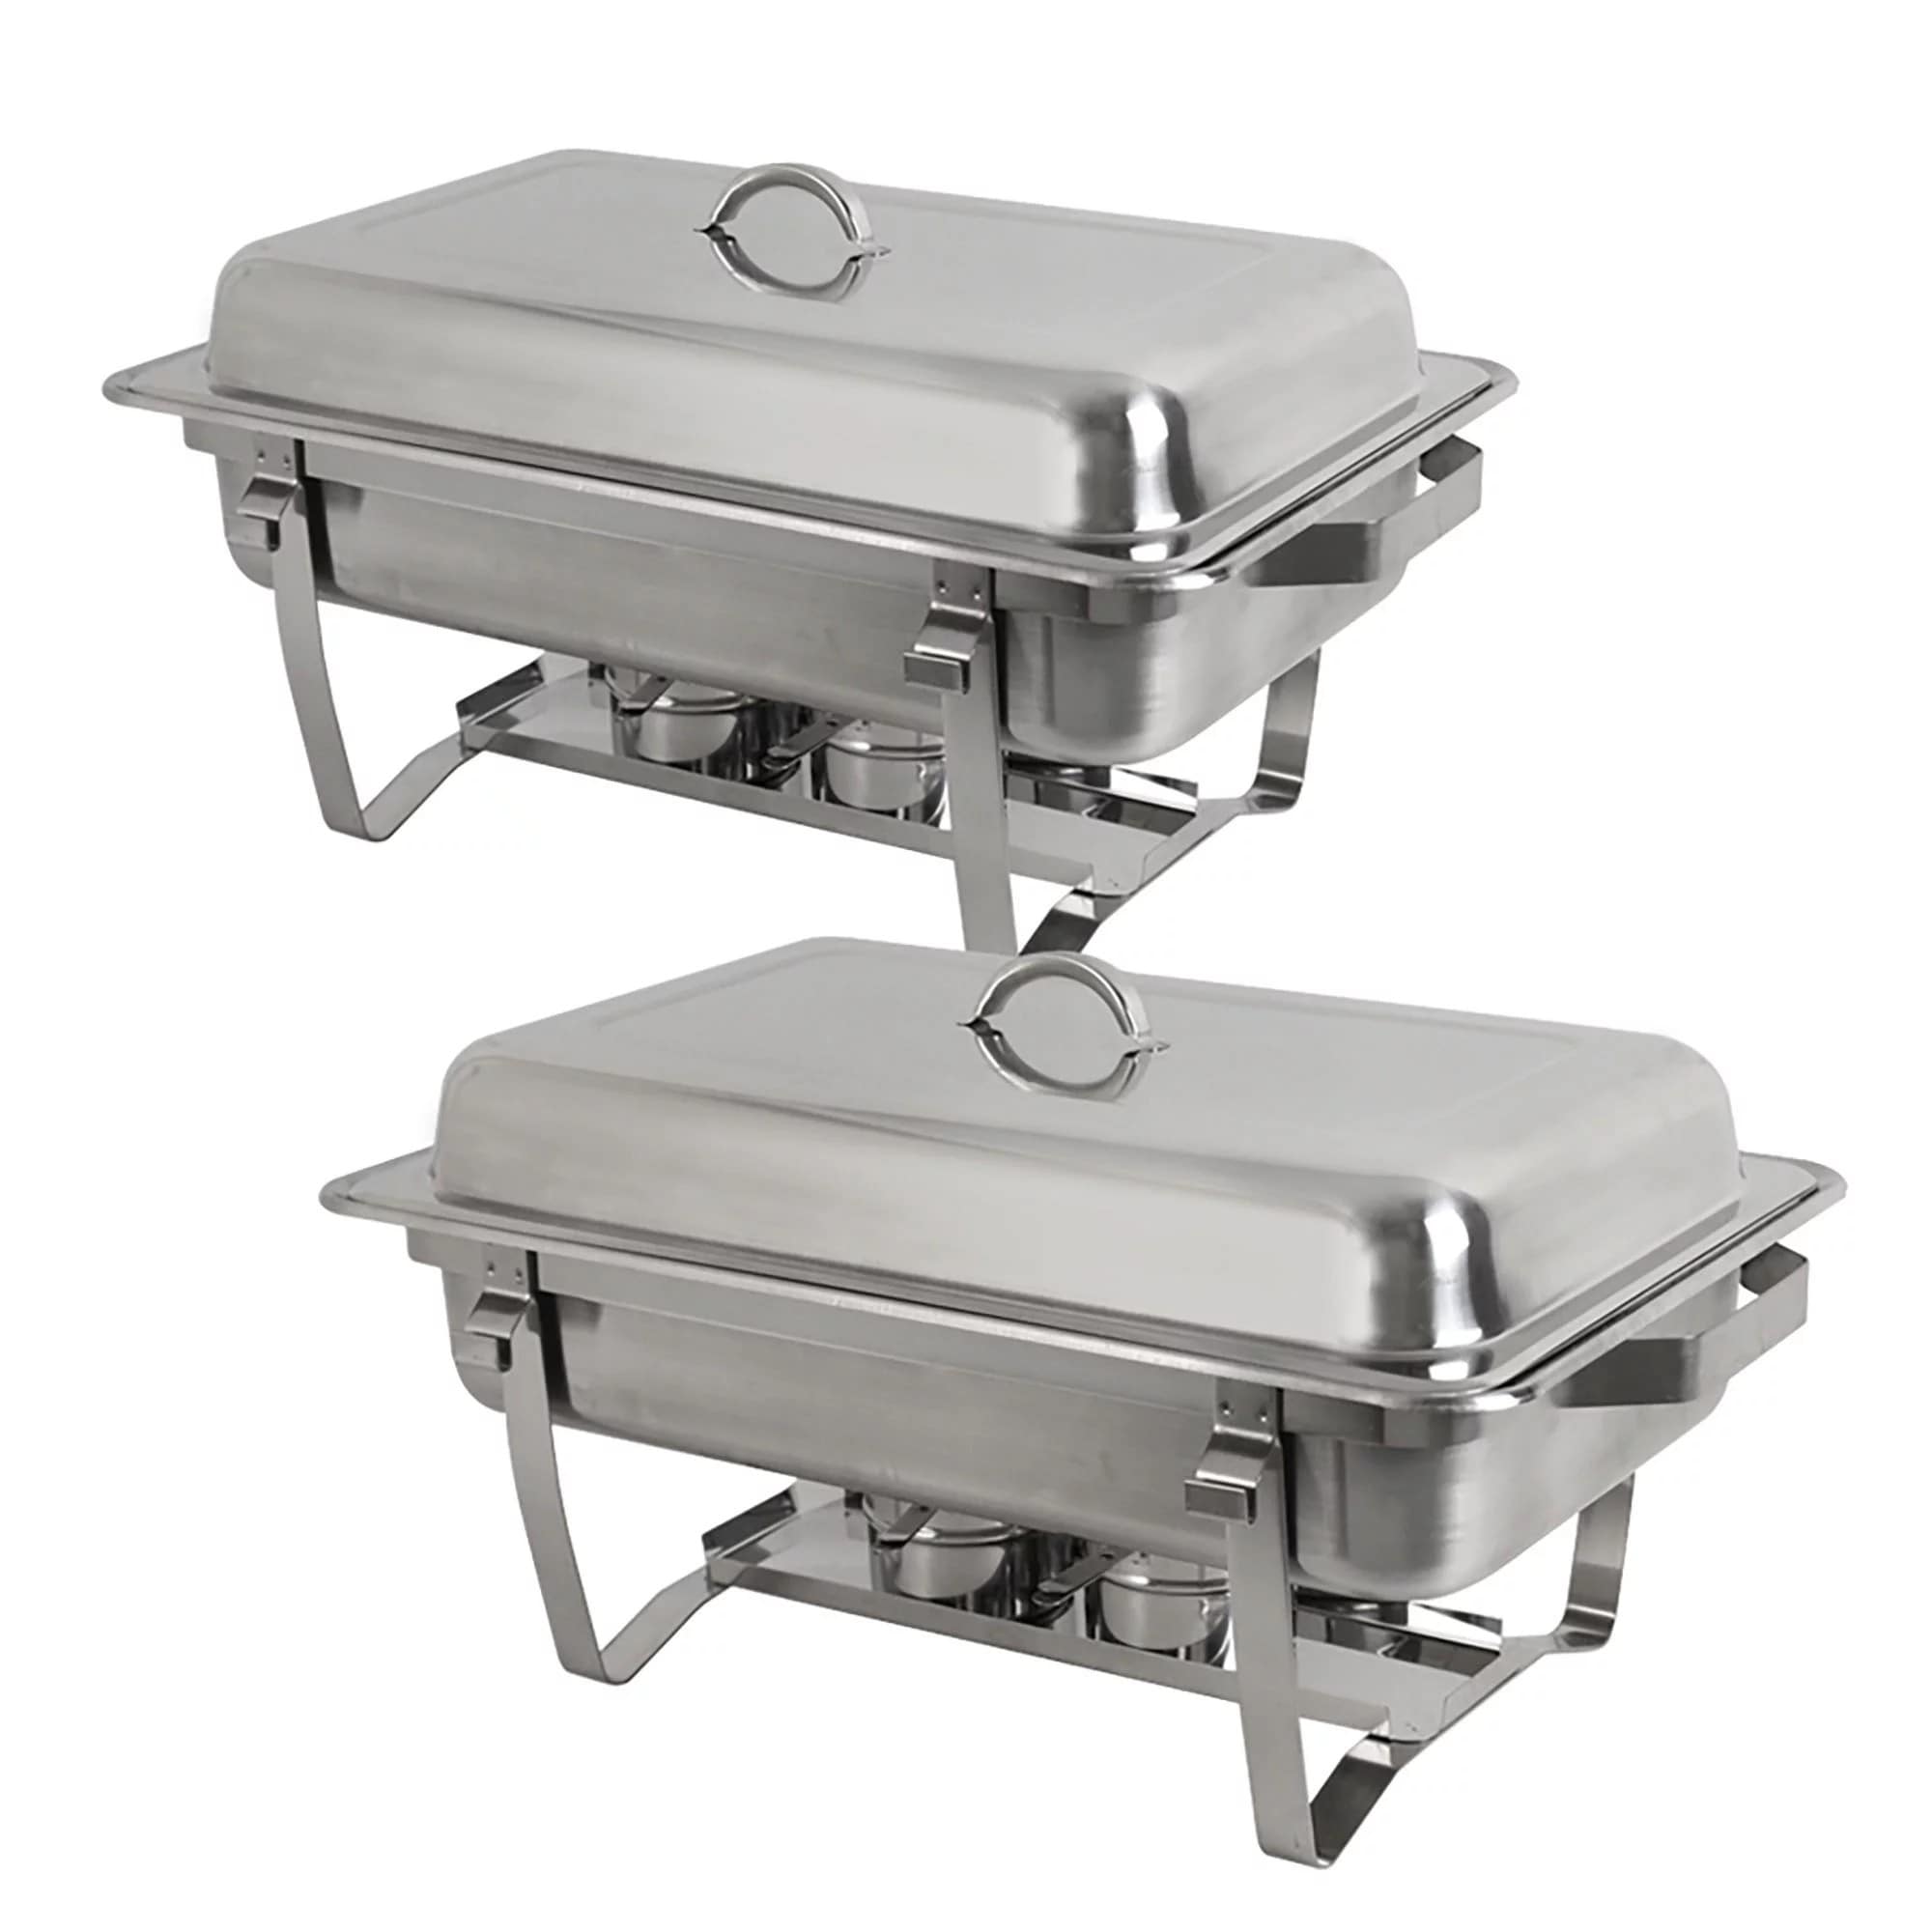 Chafing Dishes $40.00